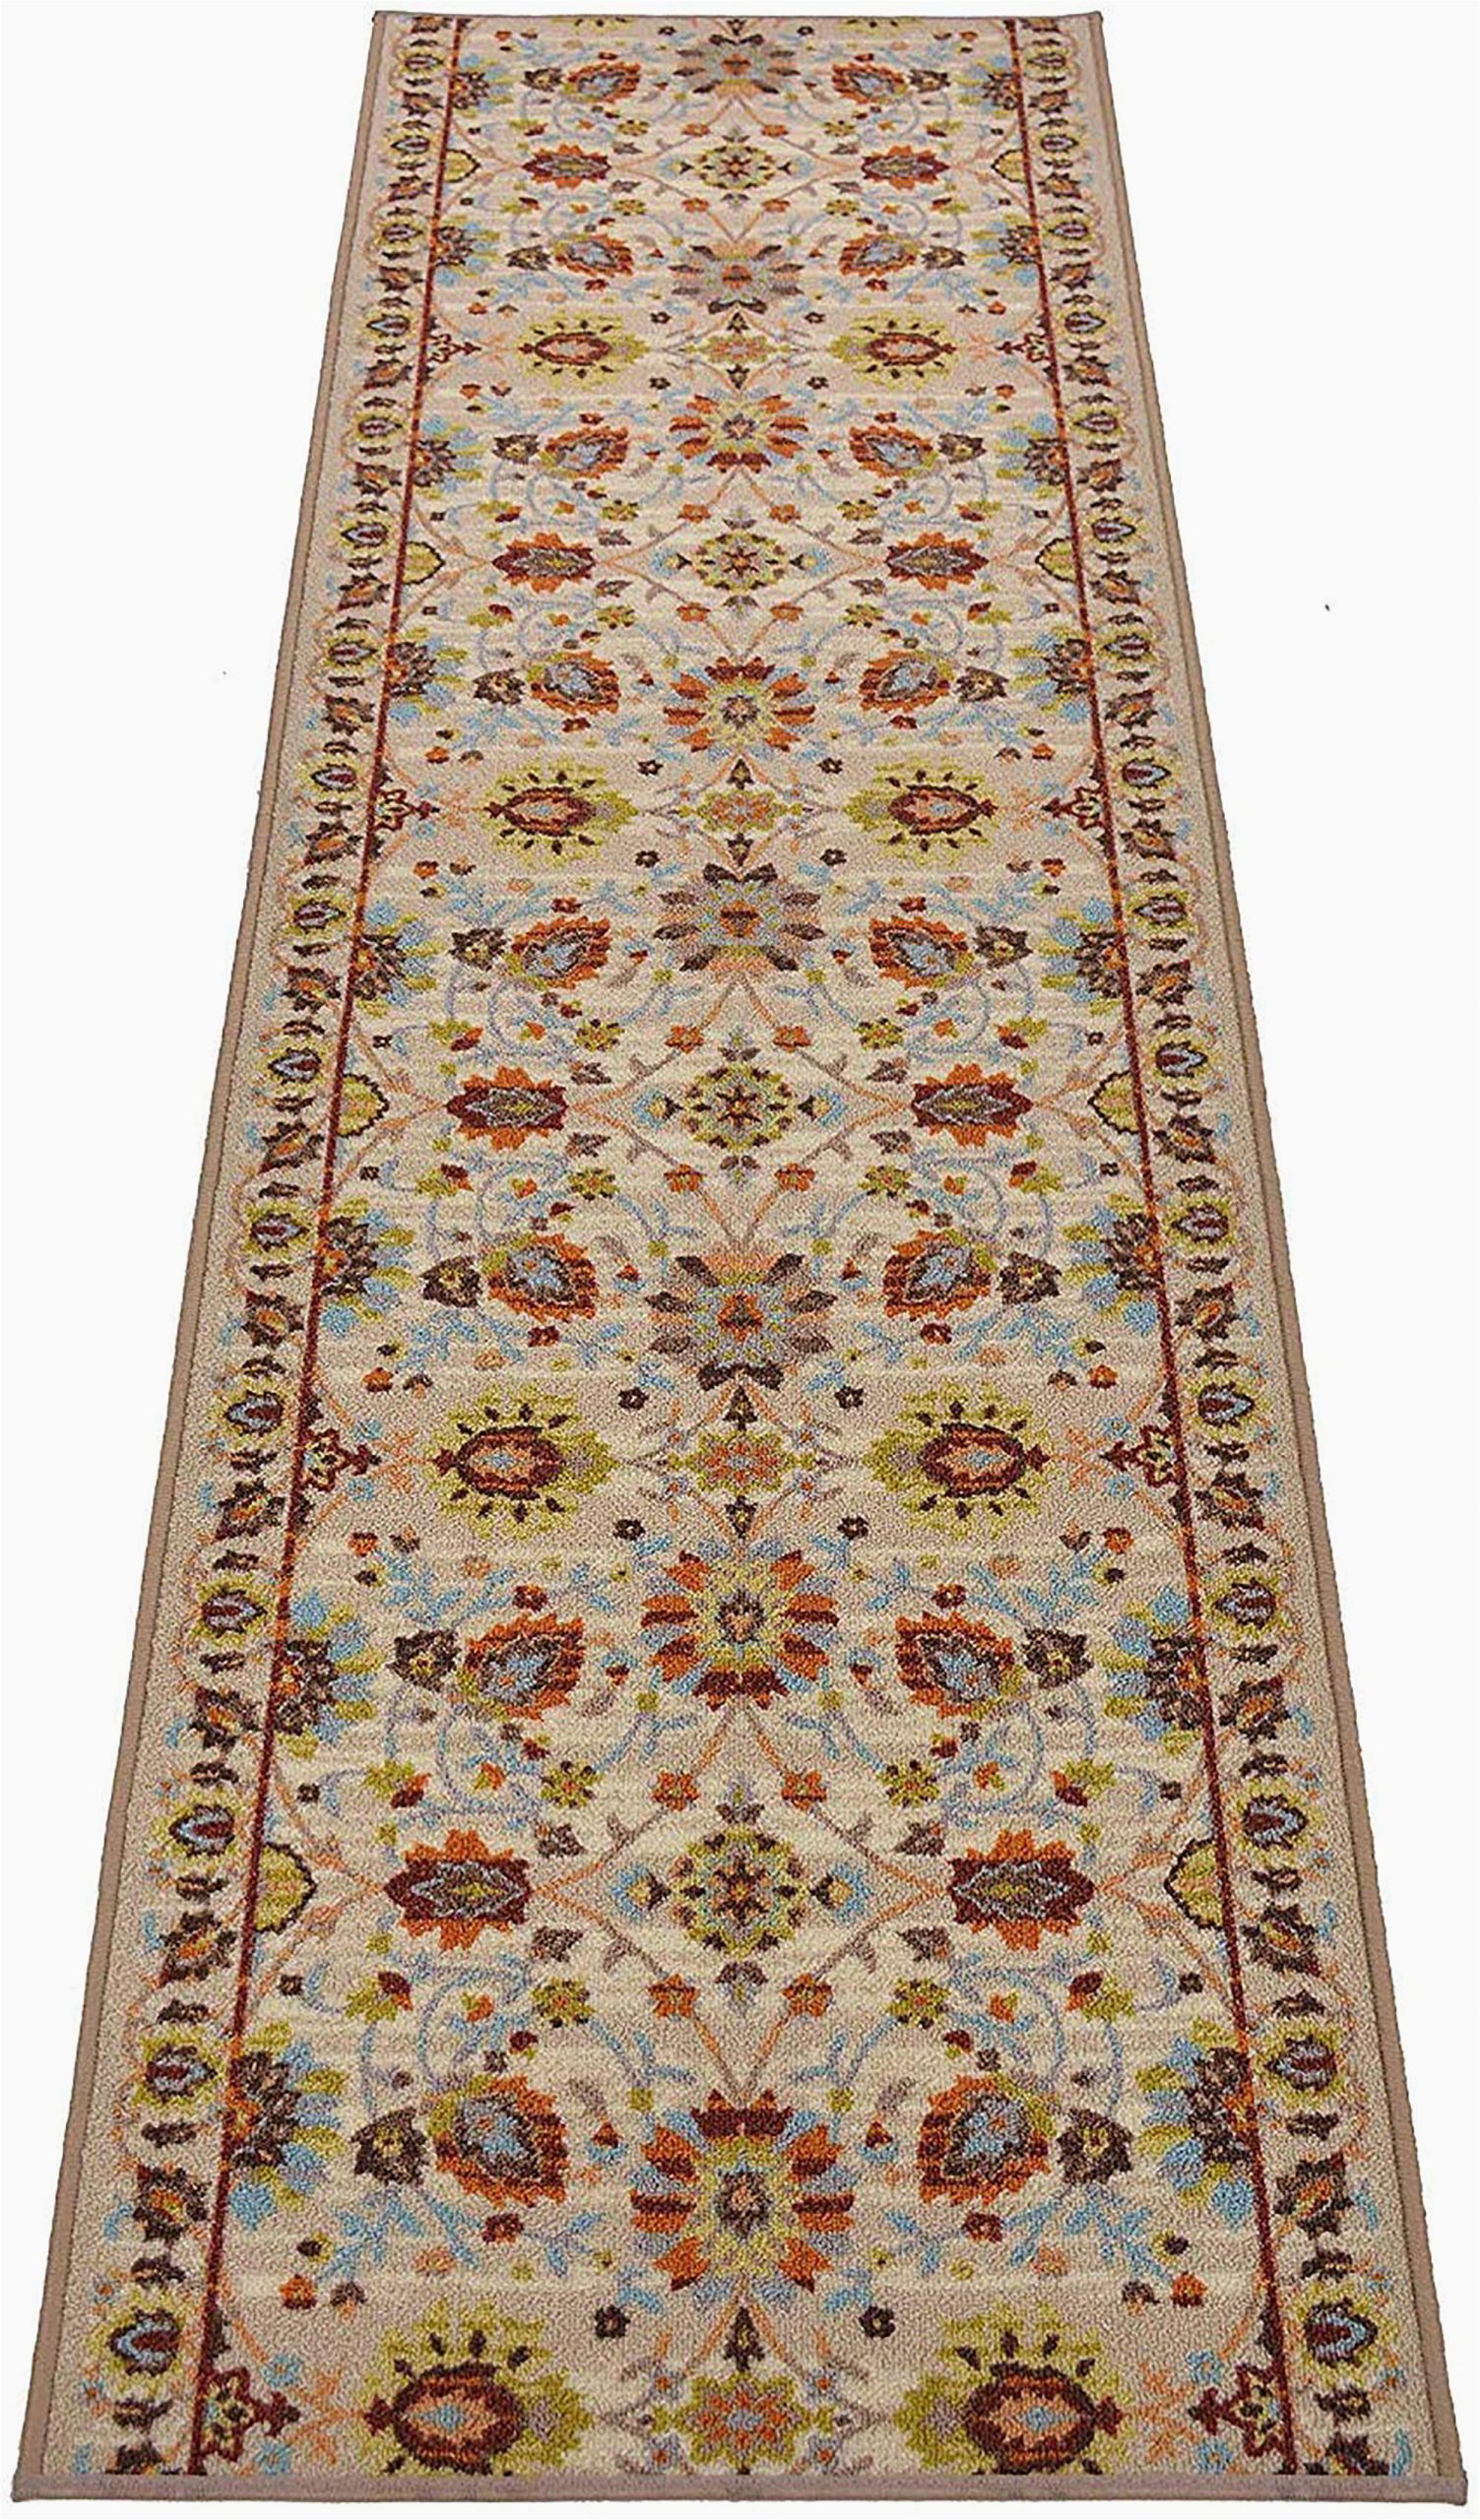 Large Rubber Backed area Rugs Dolohov Runner oriental Tufted Beige area Rug